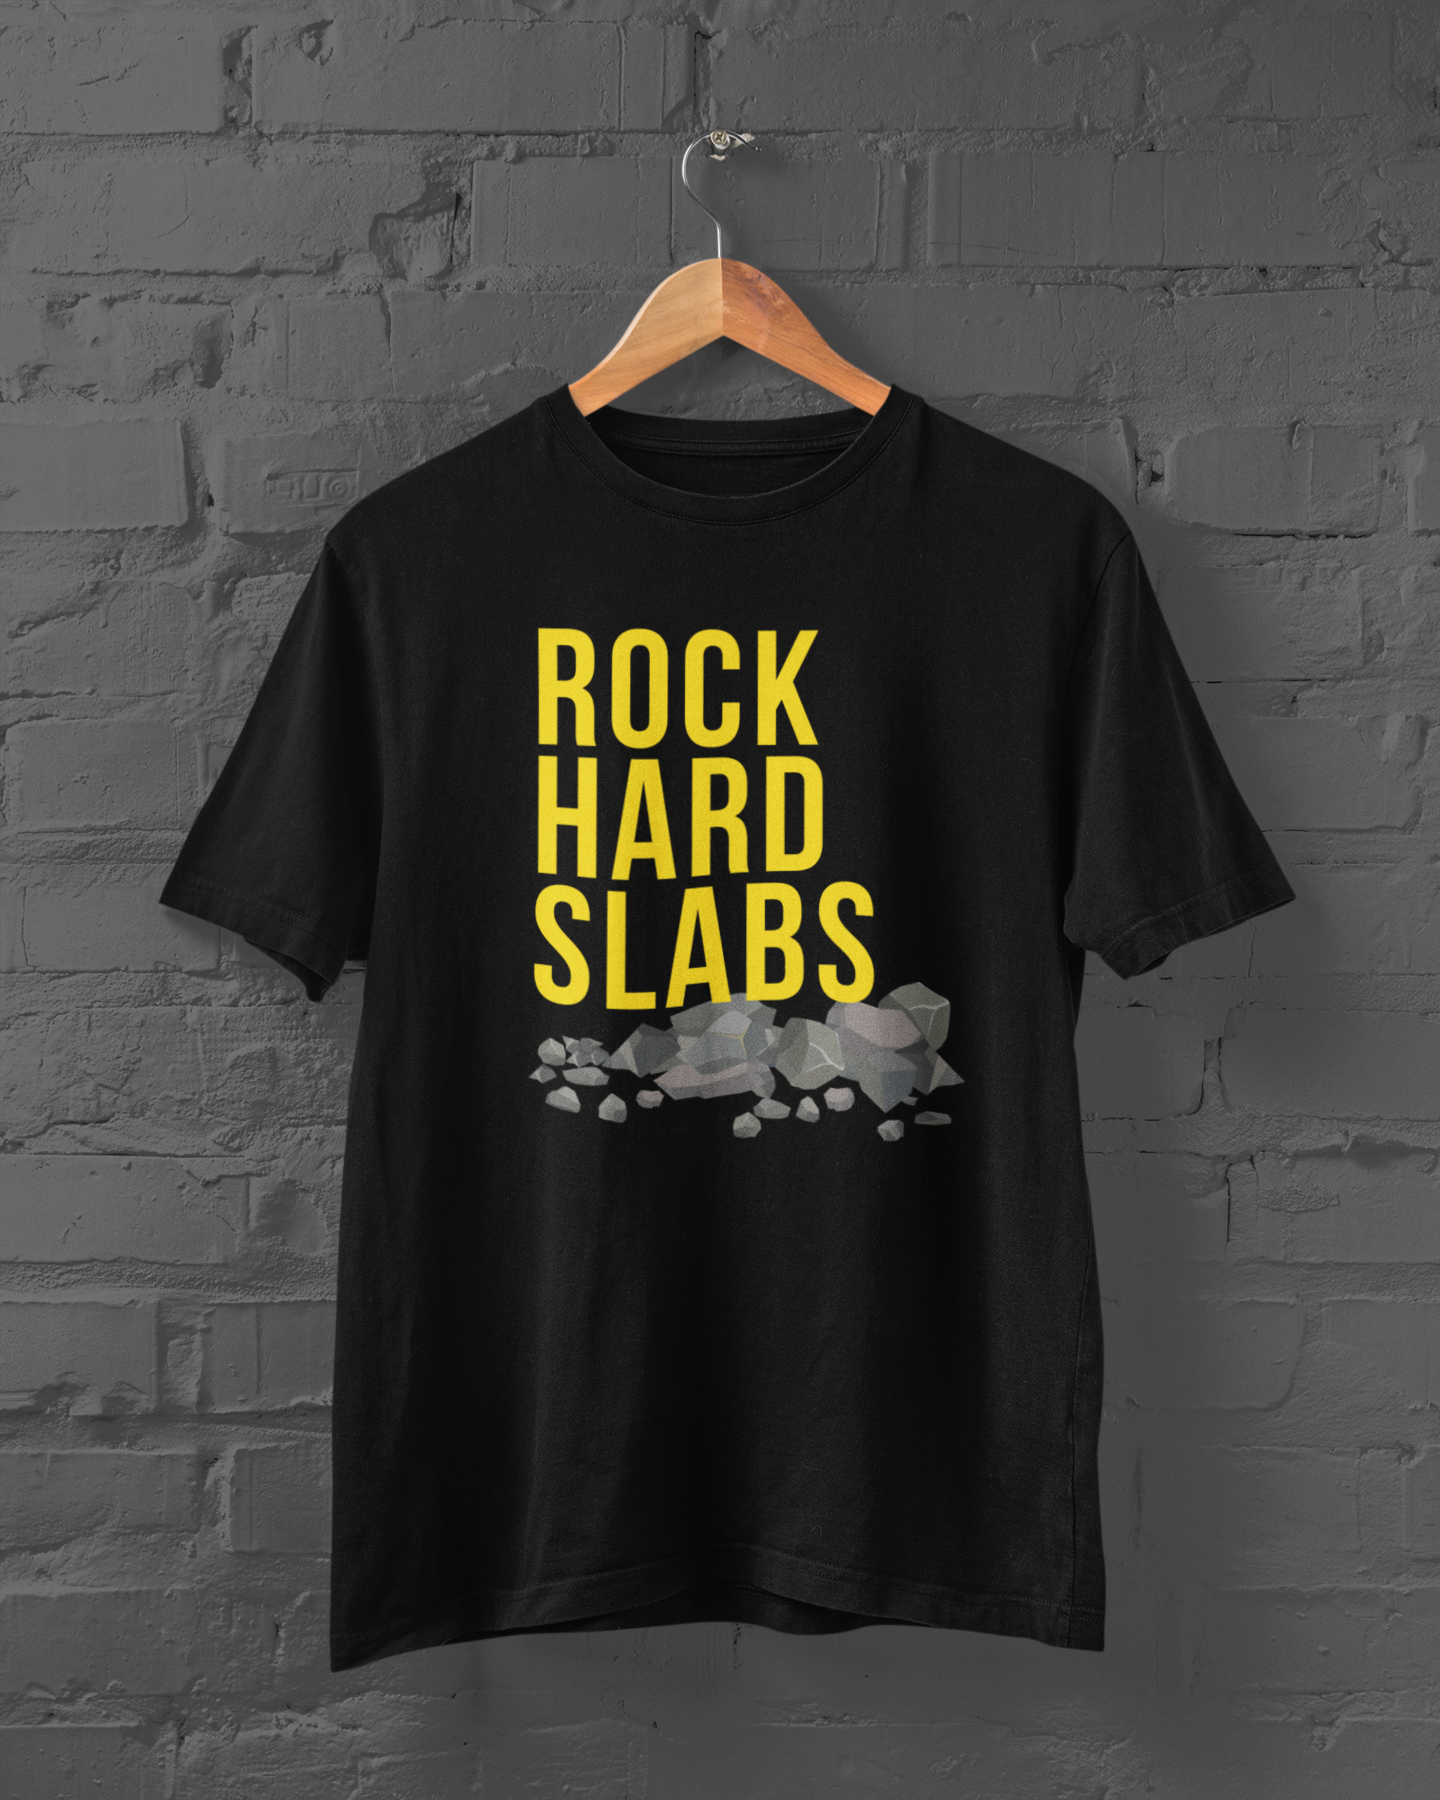 The shirt featuring the words “Rock Hard Slabs” is for those who make backyard wonderlands out of concrete, stone and rock.  After a long day of heavy lifting this shirt by Landscaper Apparel feels soft and lightweight, with the right amount of stretch.